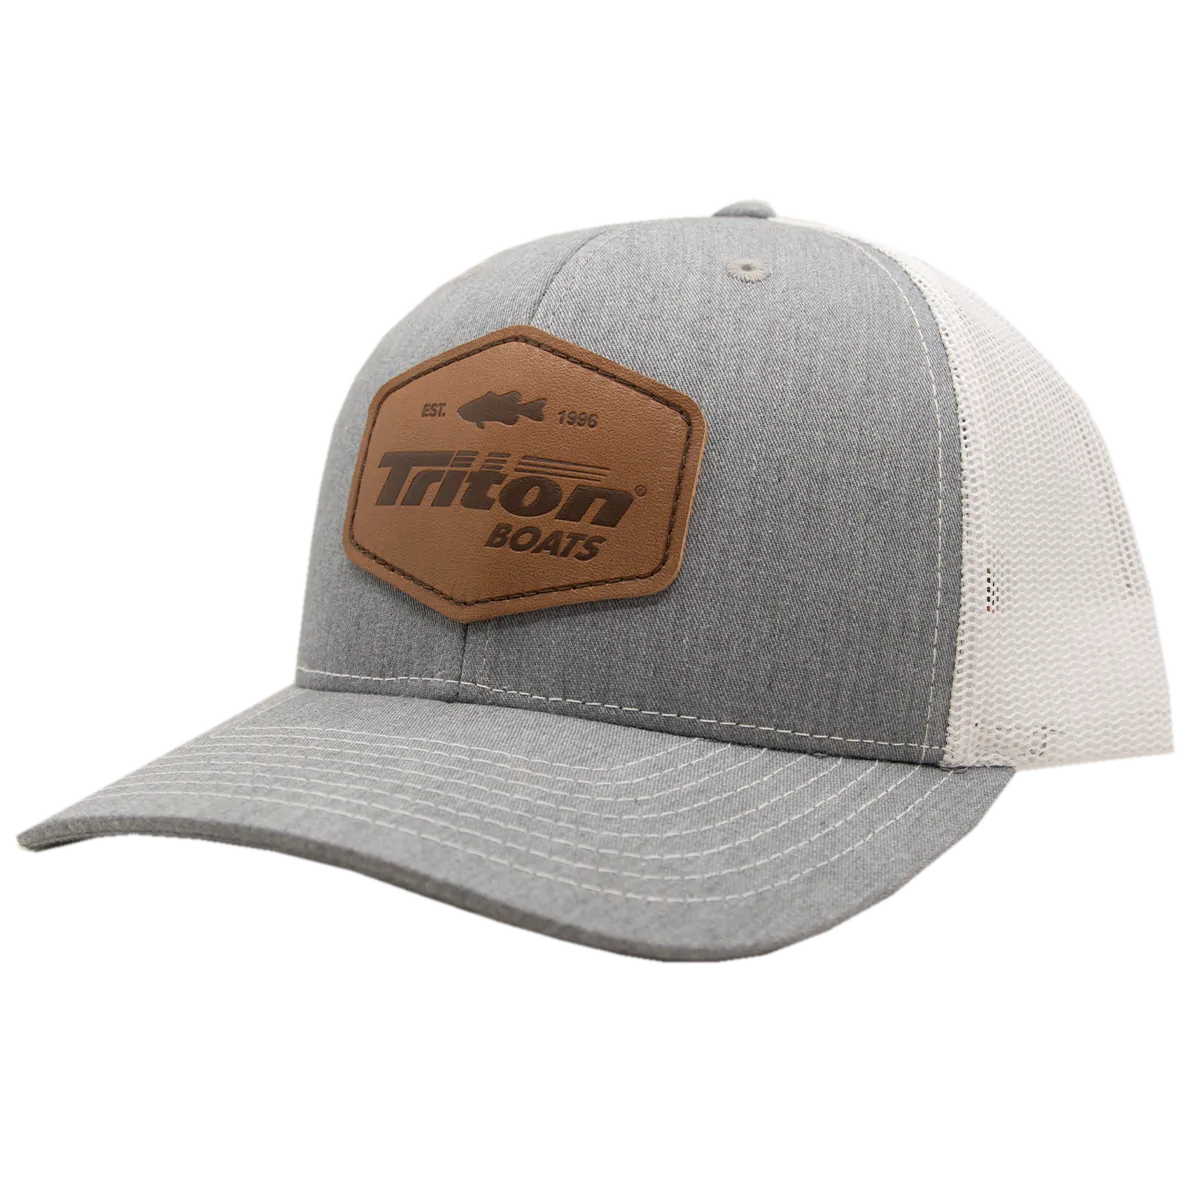 Triton Leather Patch Hat - Heather Gray/White